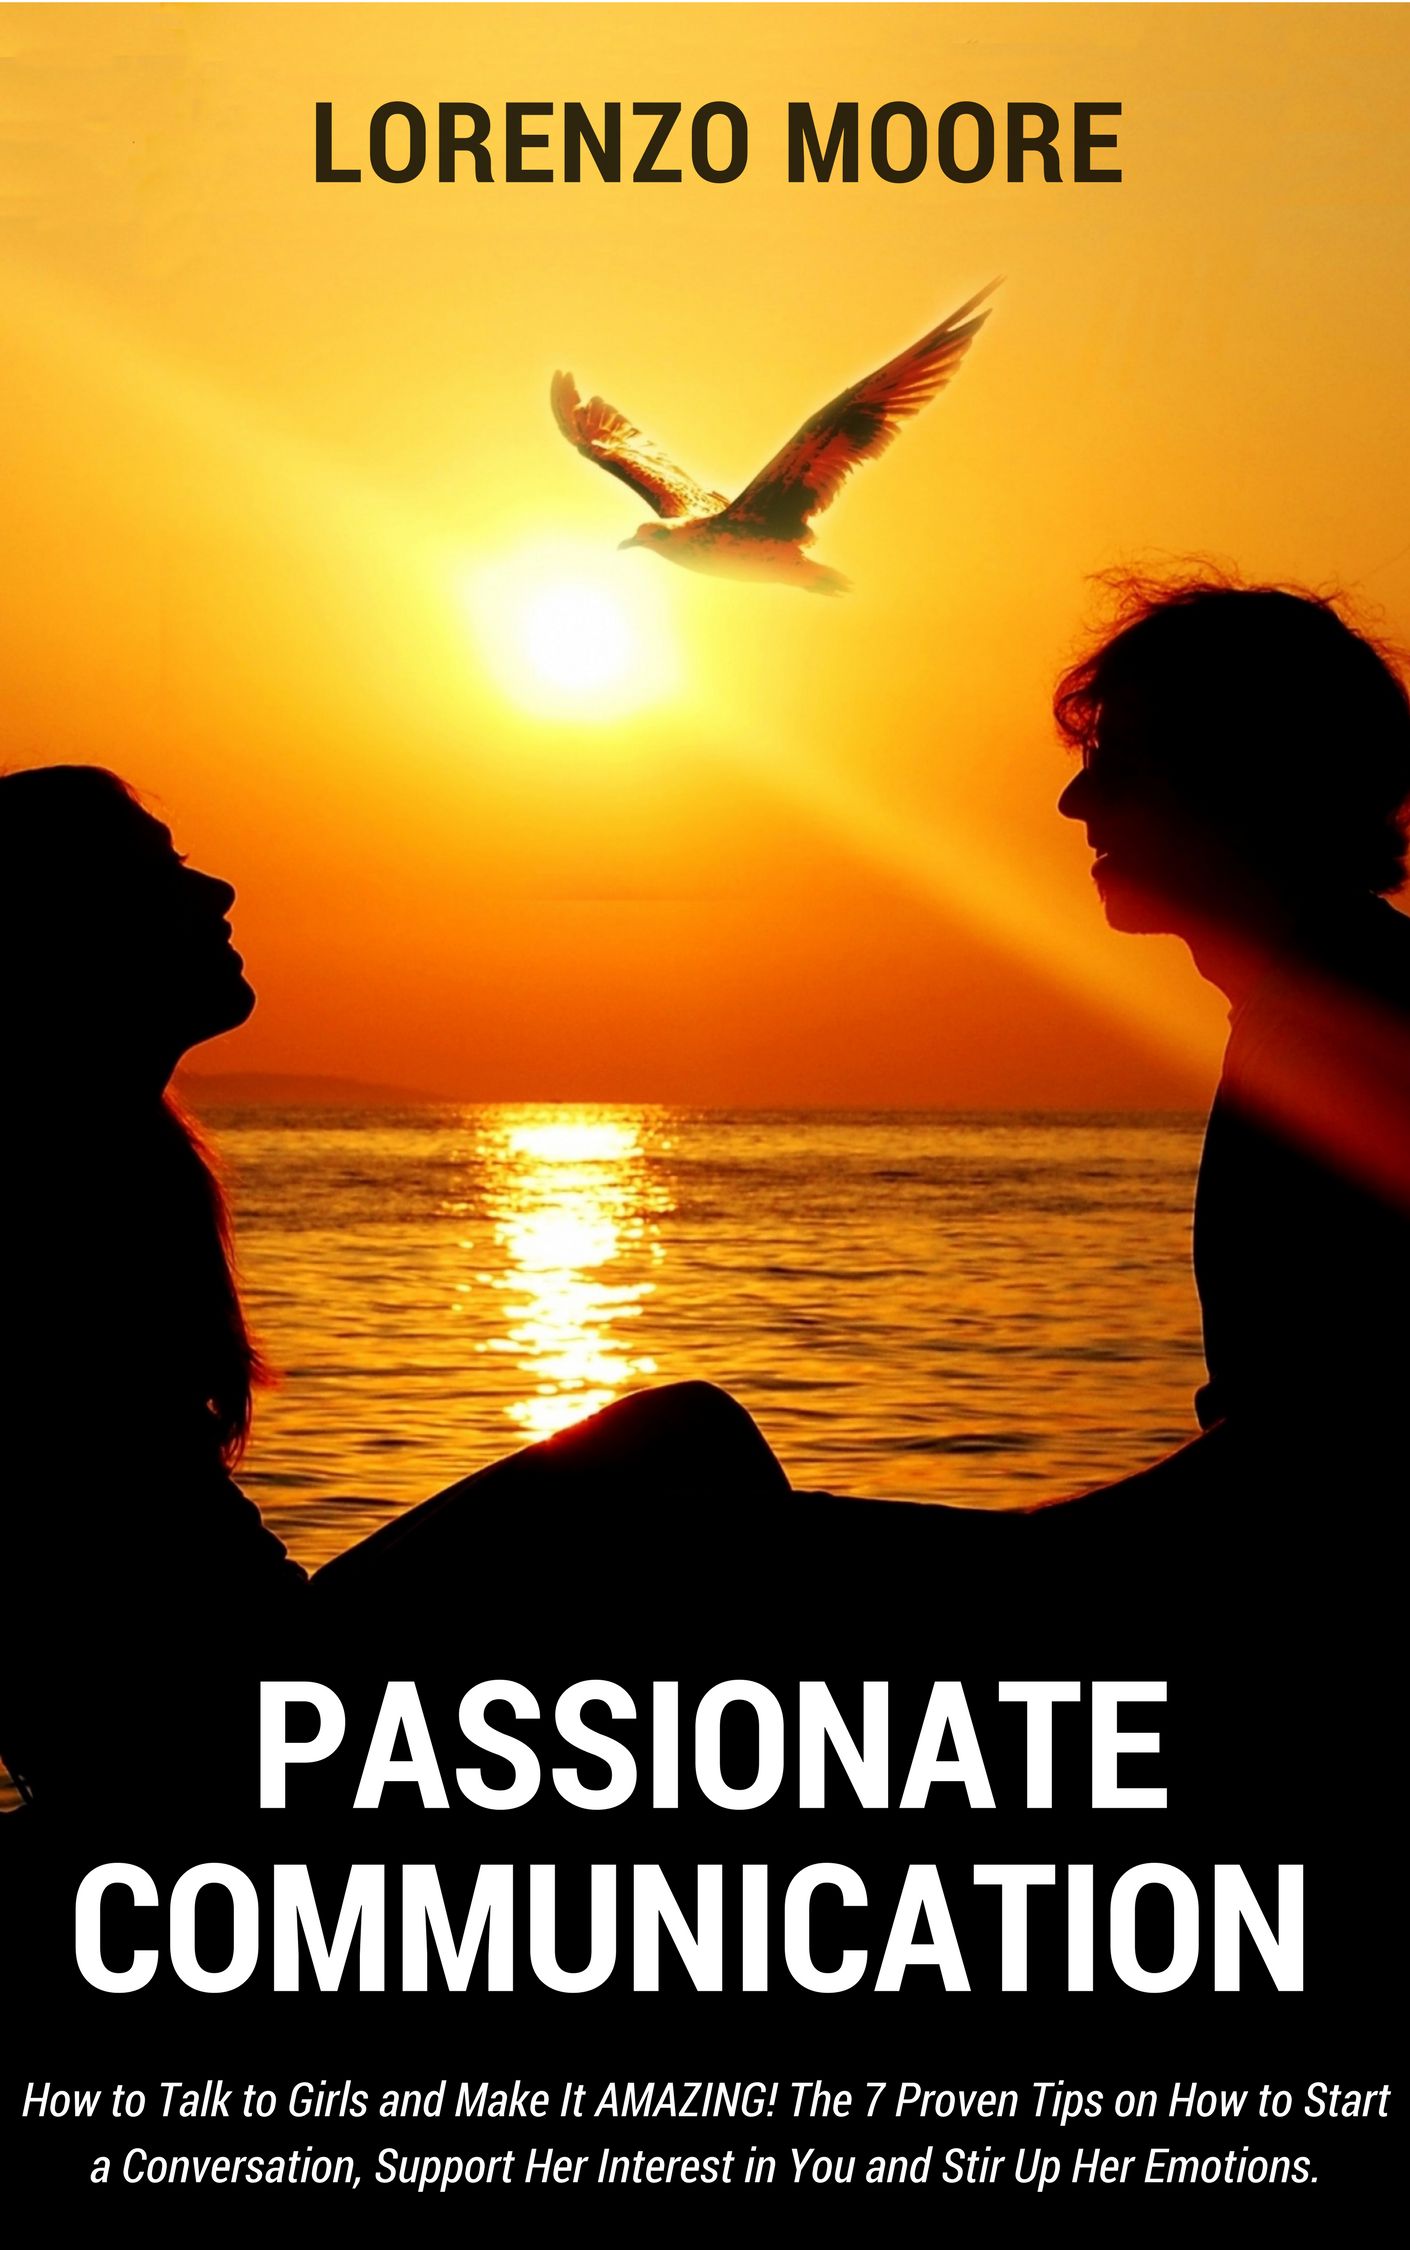 FREE: Passionate Communication: How To Talk to Girls and Make It AMAZING. The 7 Proven Tips on How to Start a Conversation, Support Her Interest in You and Stir Up Her Emotions by MooreLorenzo@hotmail.com